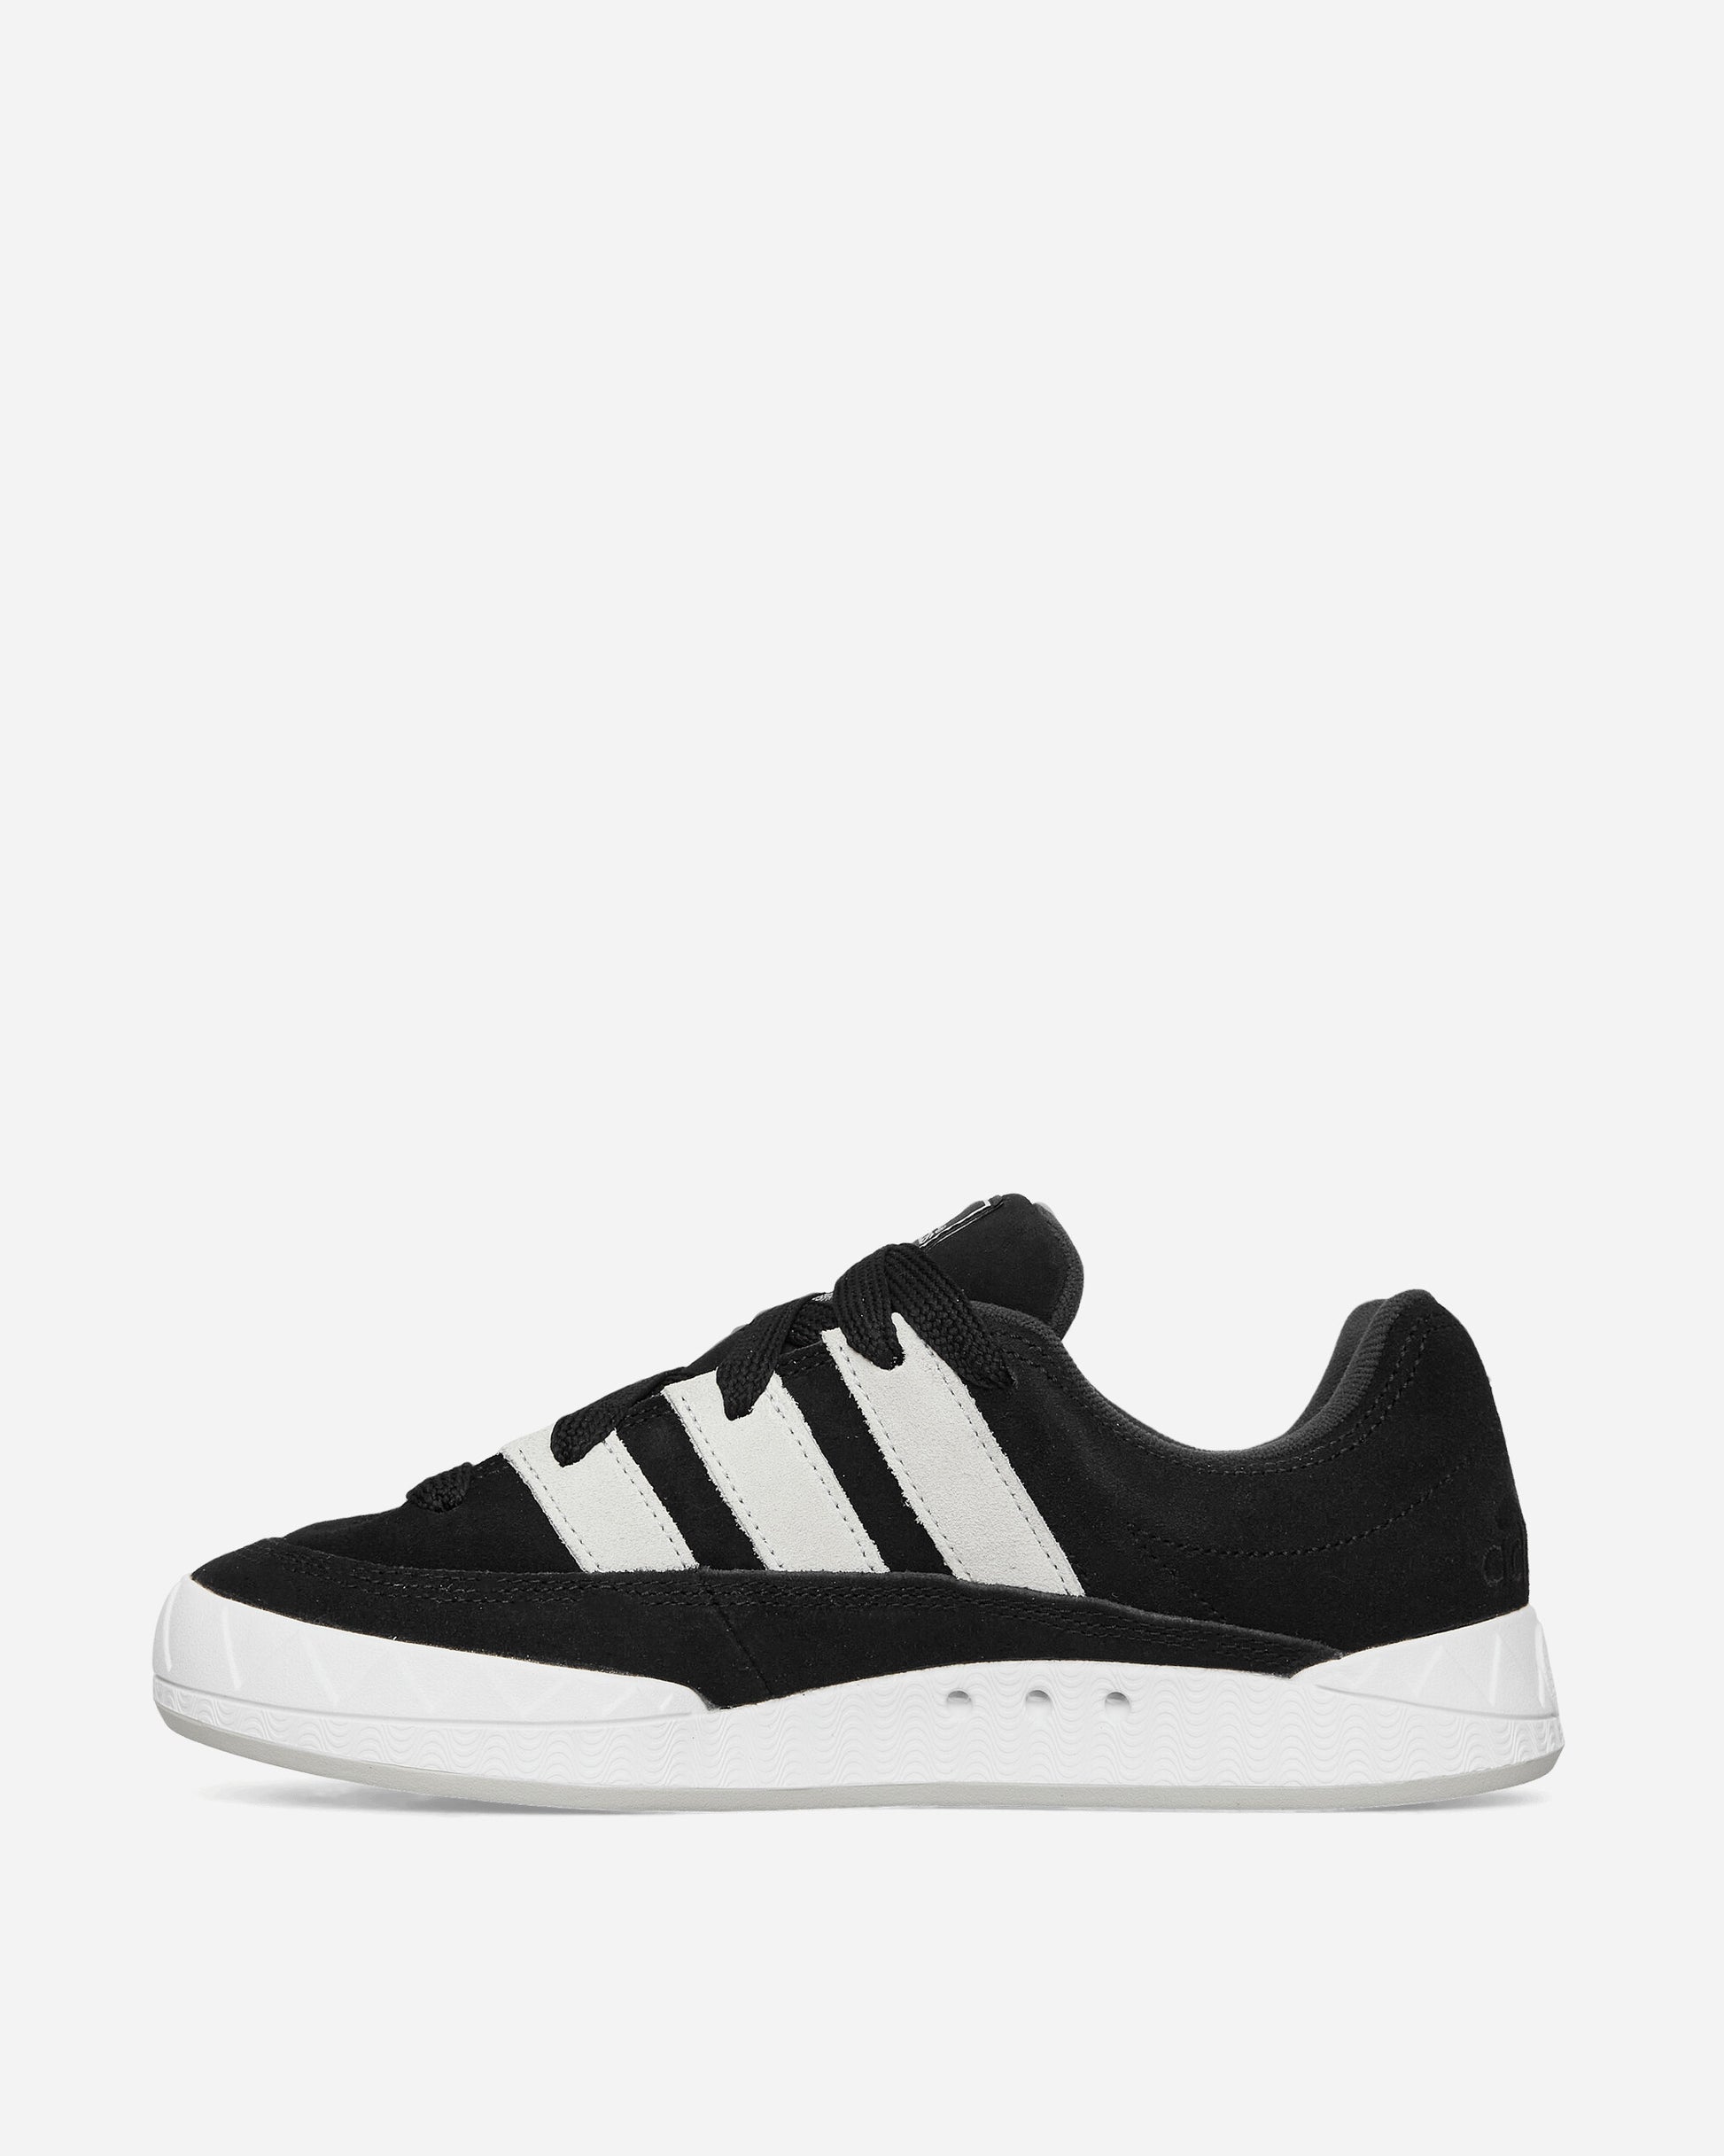 adidas Adimatic Core Black/Crystal White Sneakers Low ID8265 001